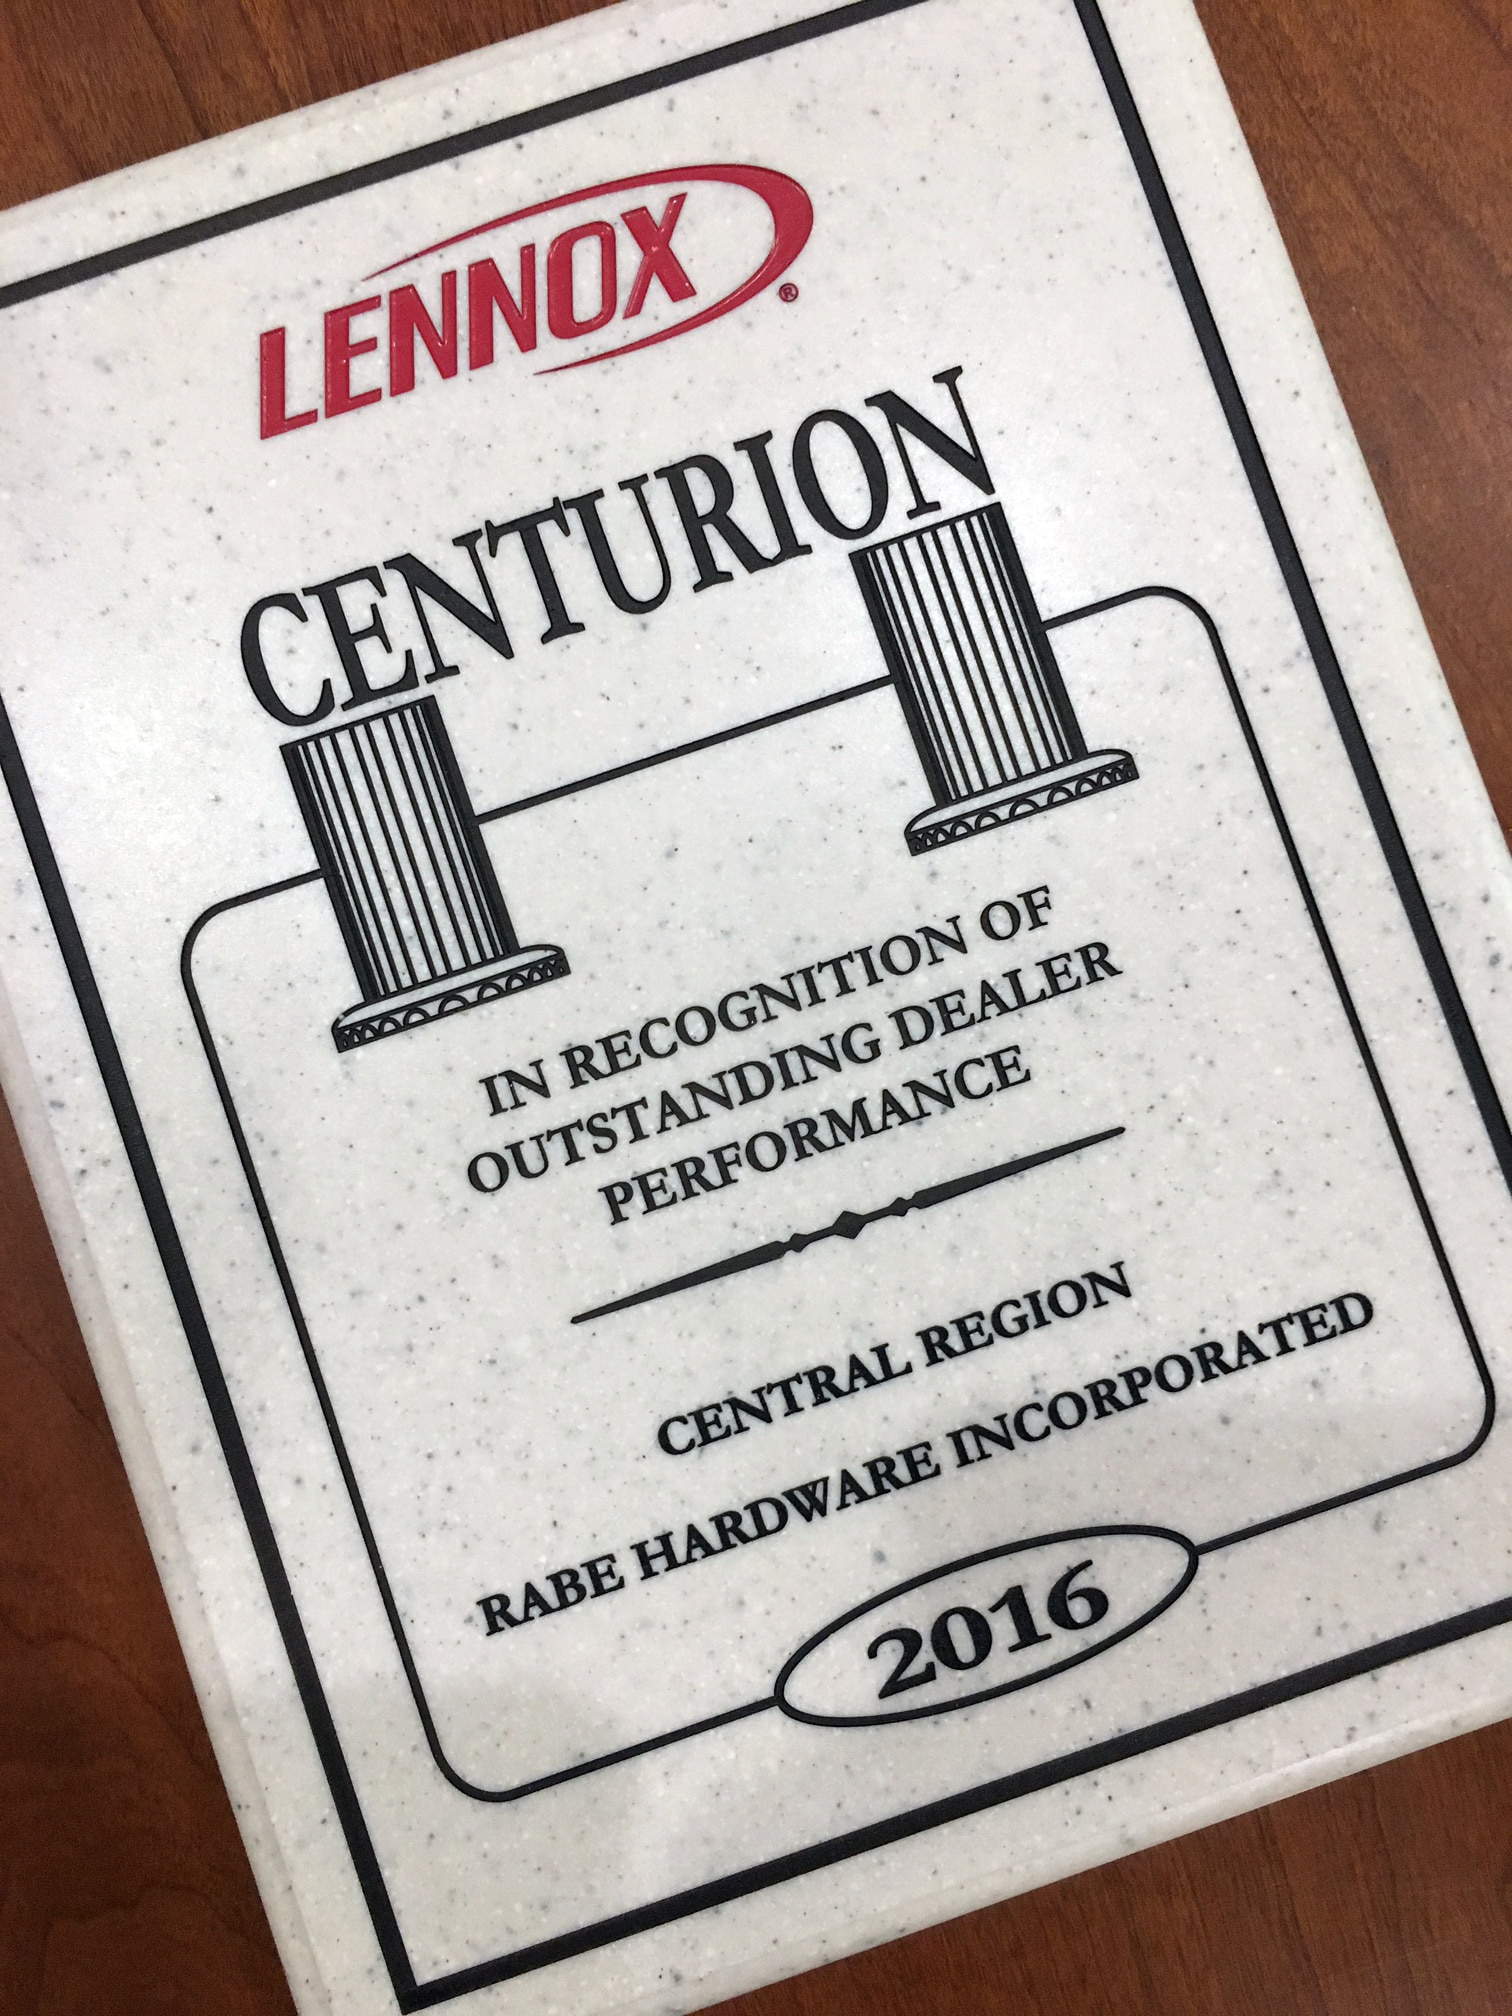 Exciting News from Lennox